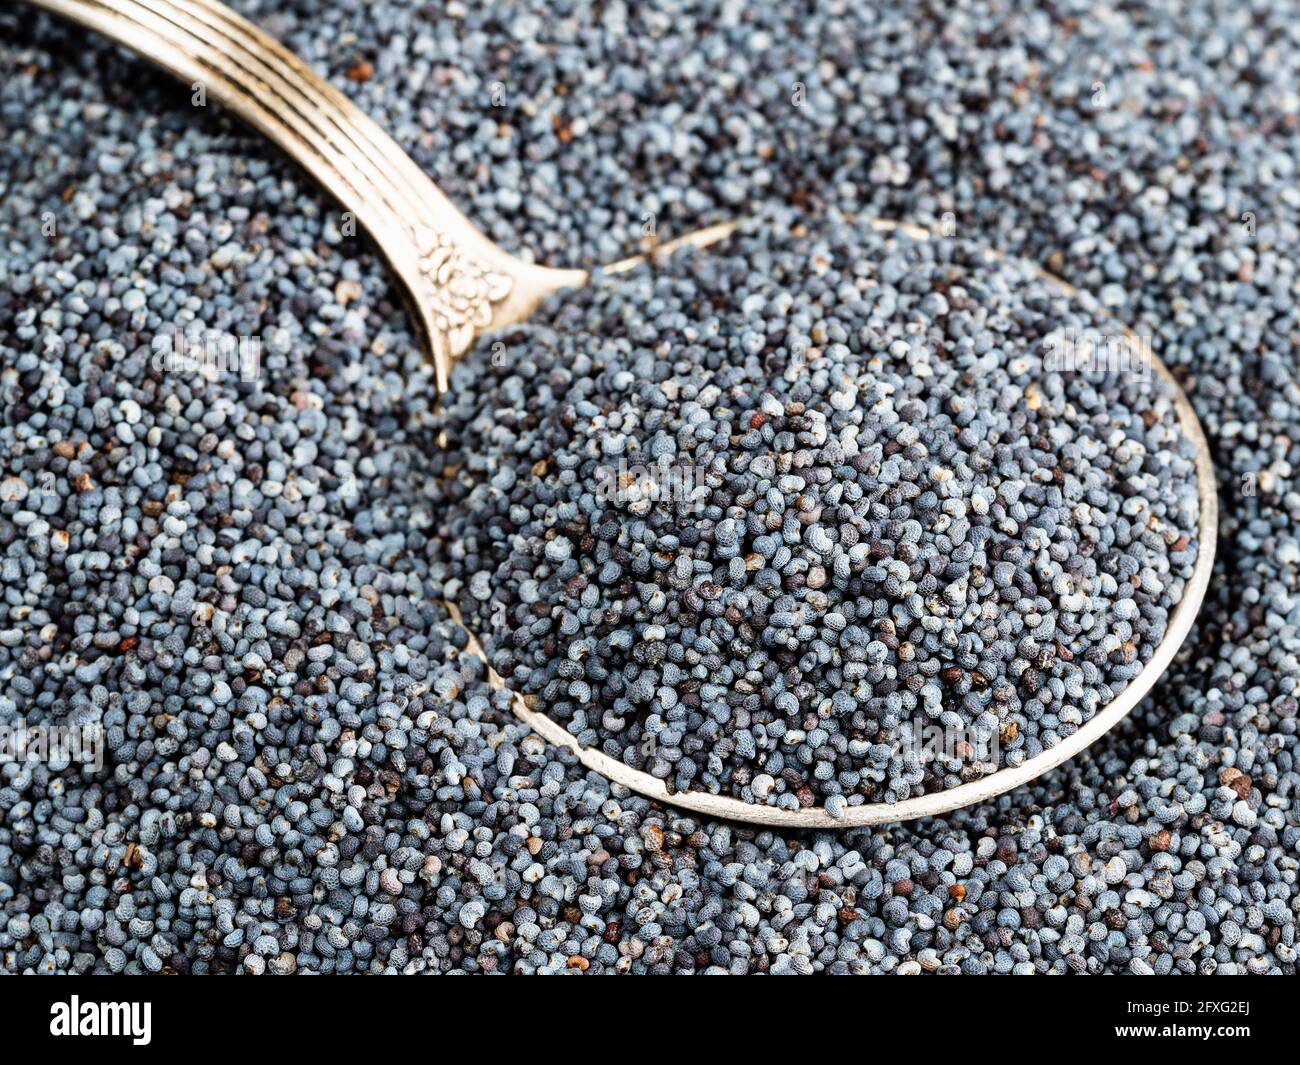 silver tablespoon in poppy seeds close up Stock Photo